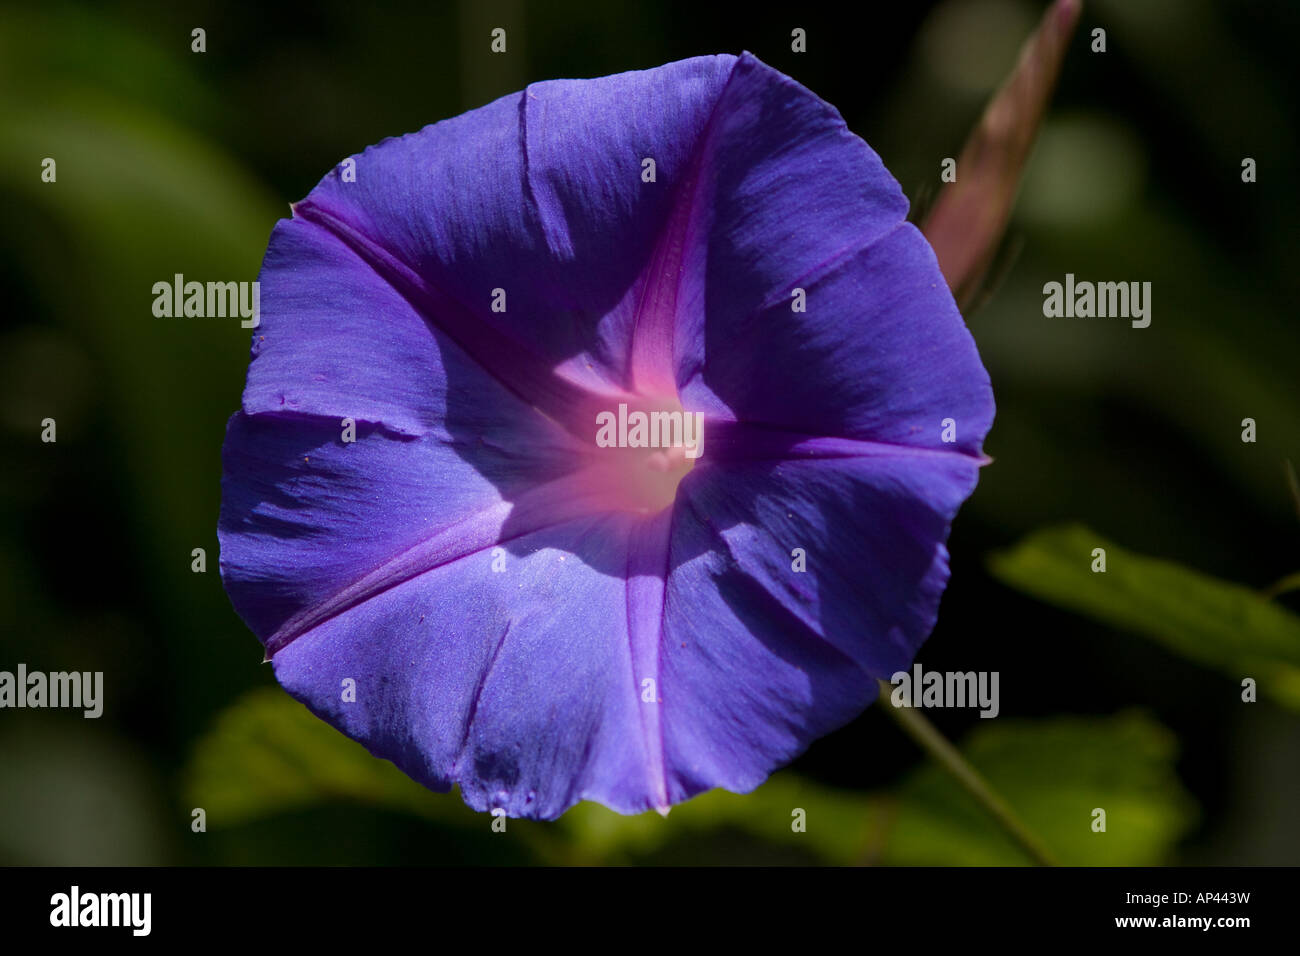 The flower known as Blue Dawn Glory, common in hedges and along roadsides late in the monsoon season. Stock Photo